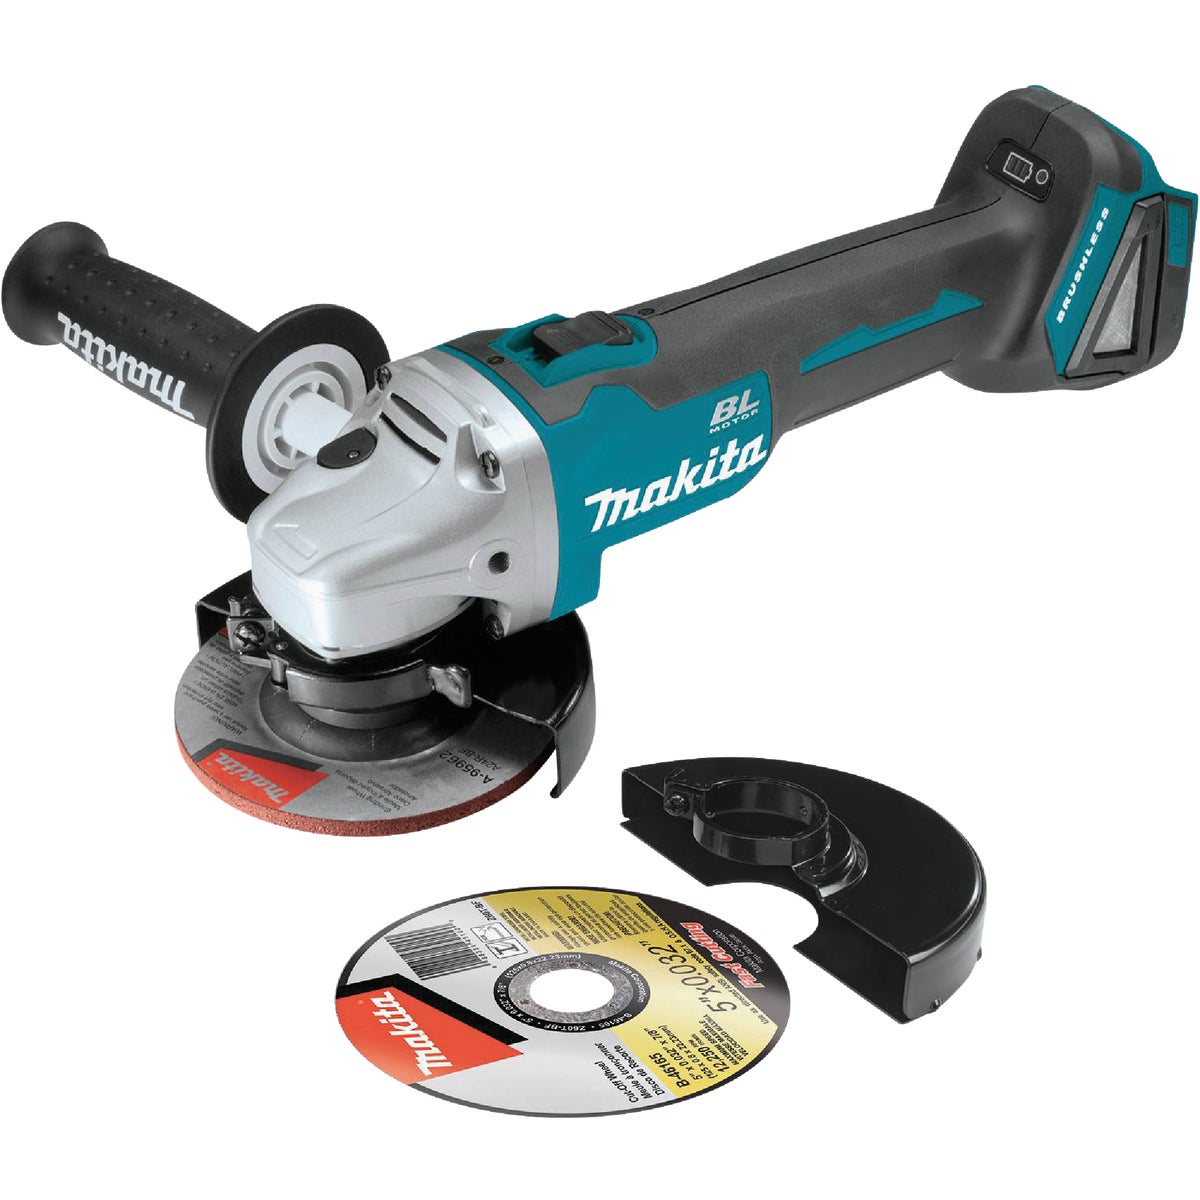 Makita 18 Volt LXT Lithium-Ion 4-1/2 In. - 5 In. Brushless Cordless Angle Grinder/Cut-Off Tool (Tool Only)